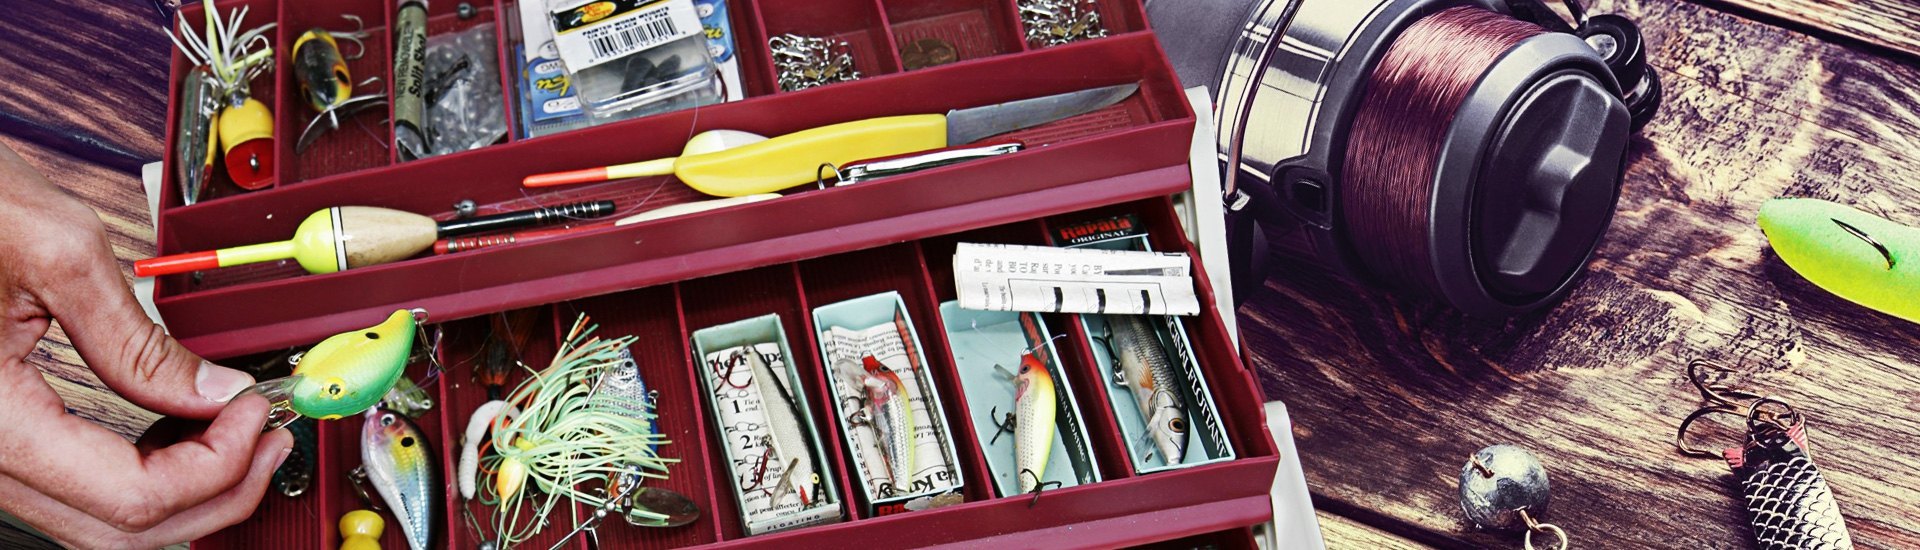 Fishing Accessory,Transparent Fly Lure Box Bait Tackle Box Fly Lure  Container Expertly Crafted